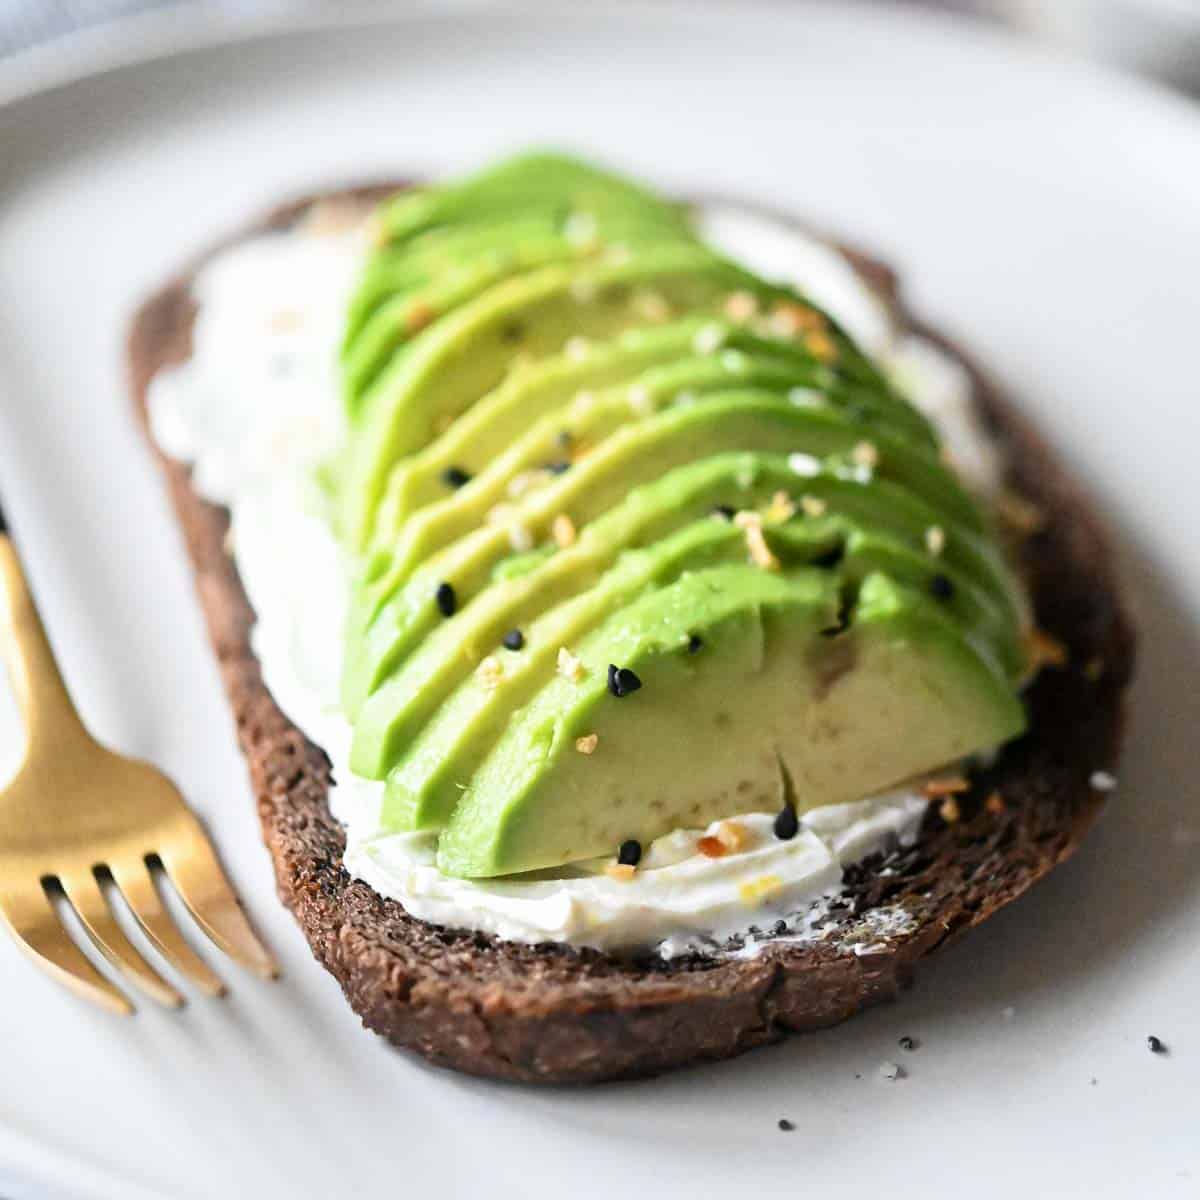 Slices of avocado and cream cheese on pumpernickel bread on a white plate.